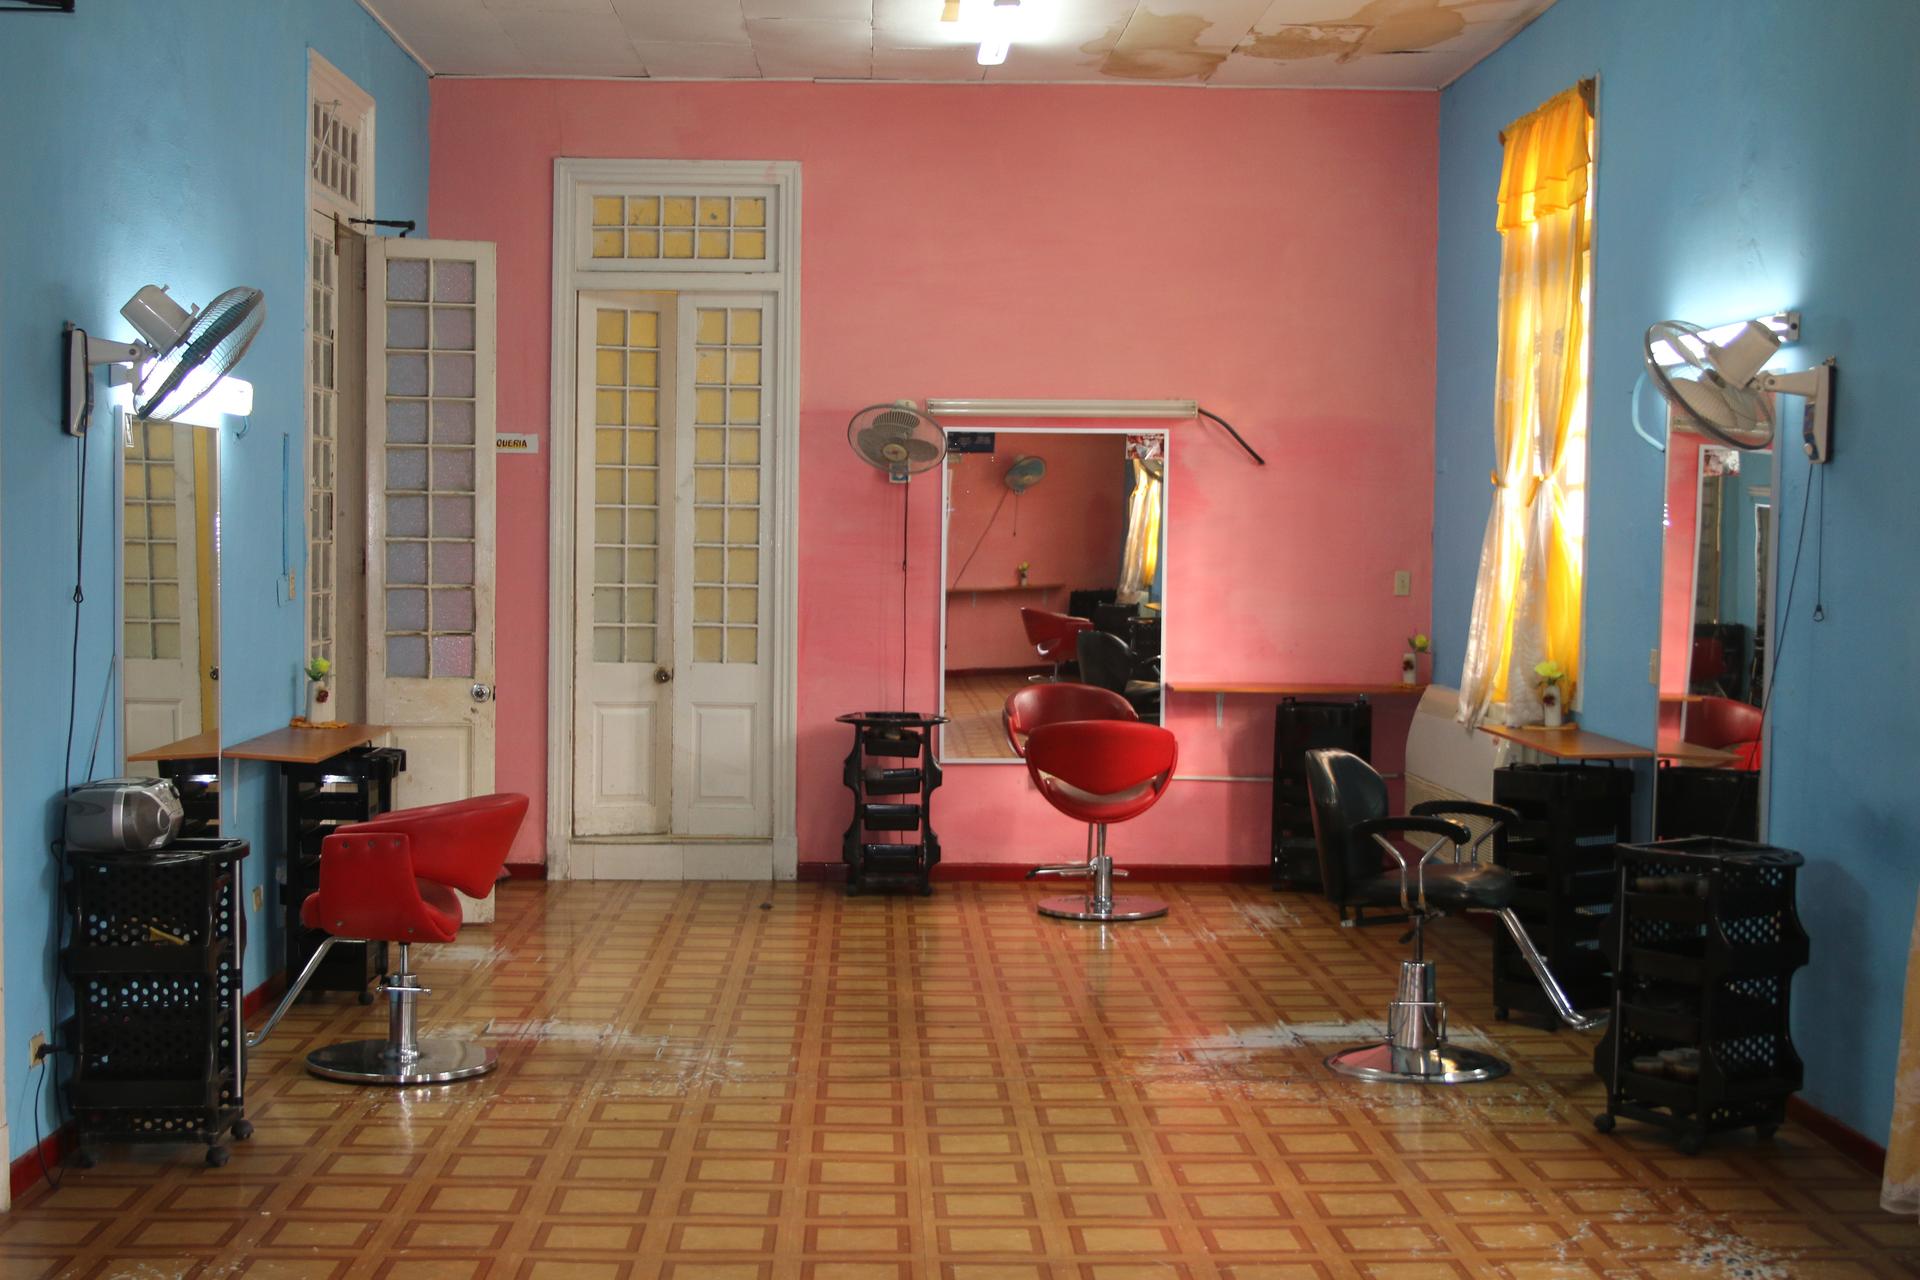 The Bella ll Health and Beauty Institute, a beauty salon in Havana